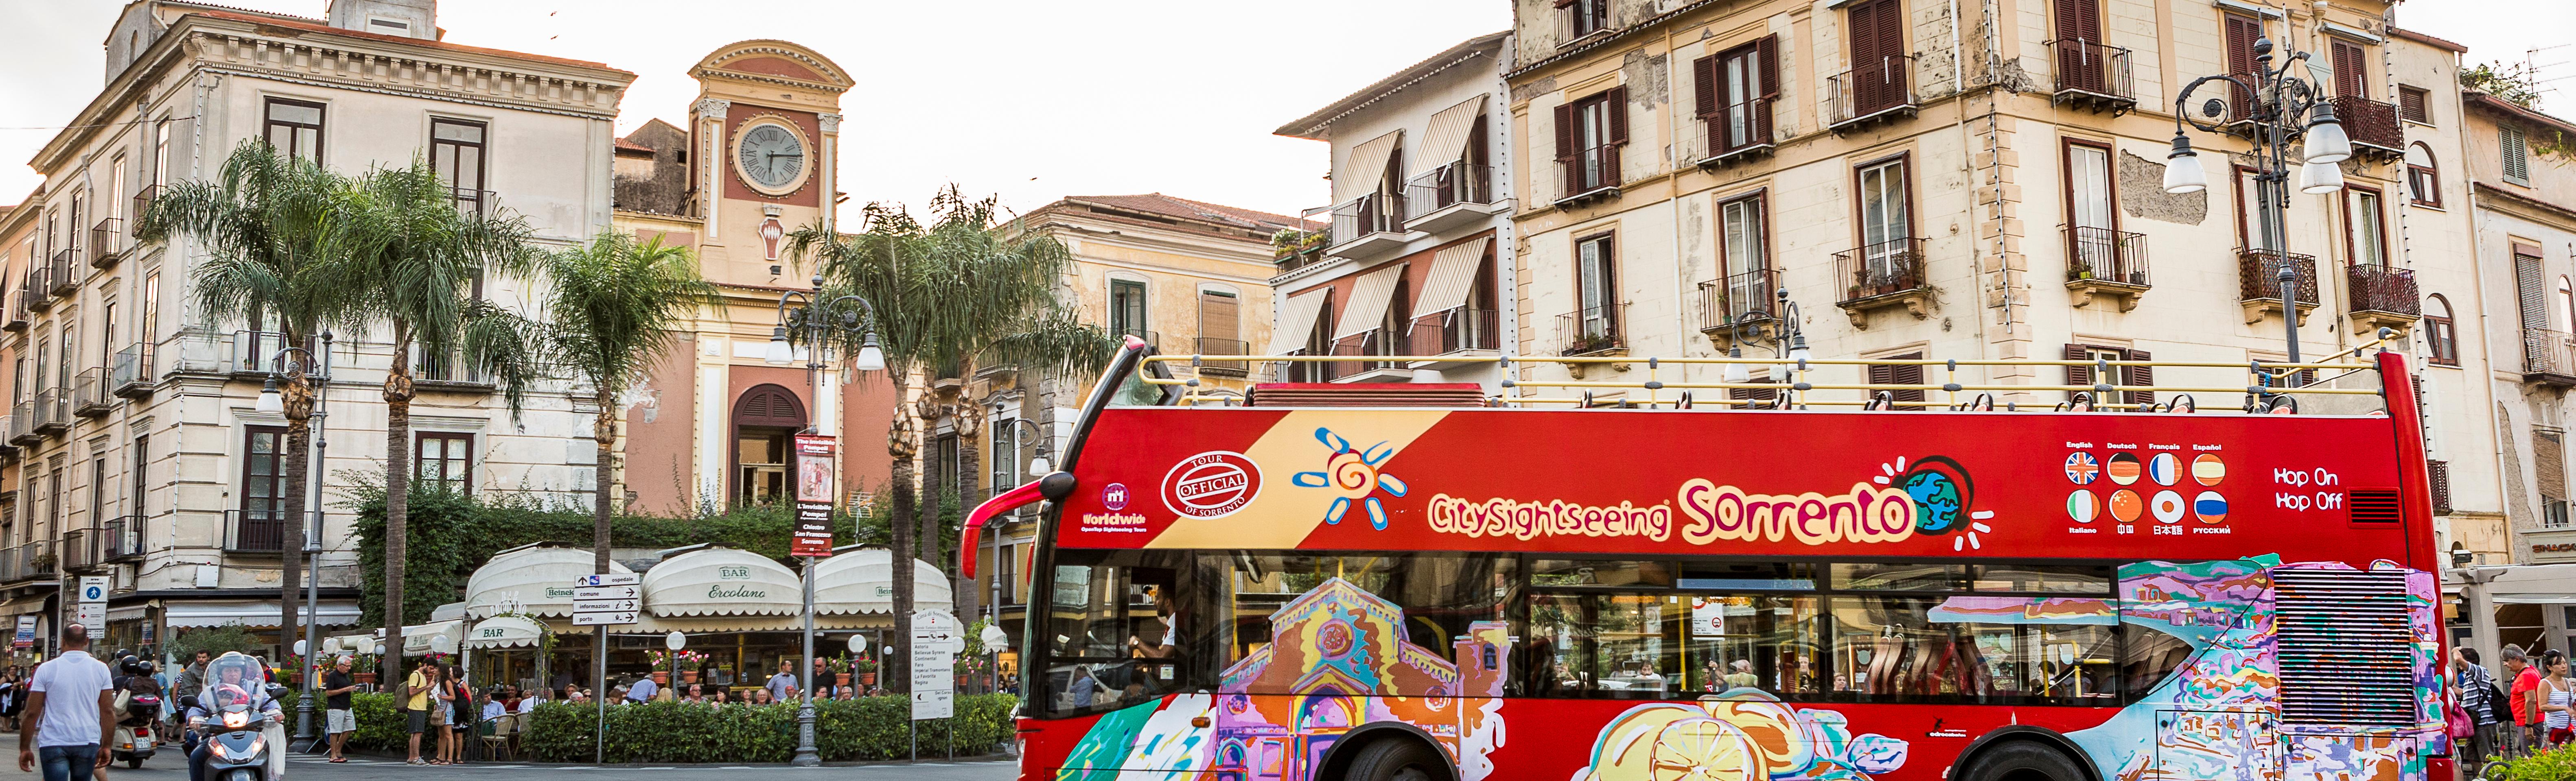 Sorrento by hop-on hop-off bus - 1 day transport pass